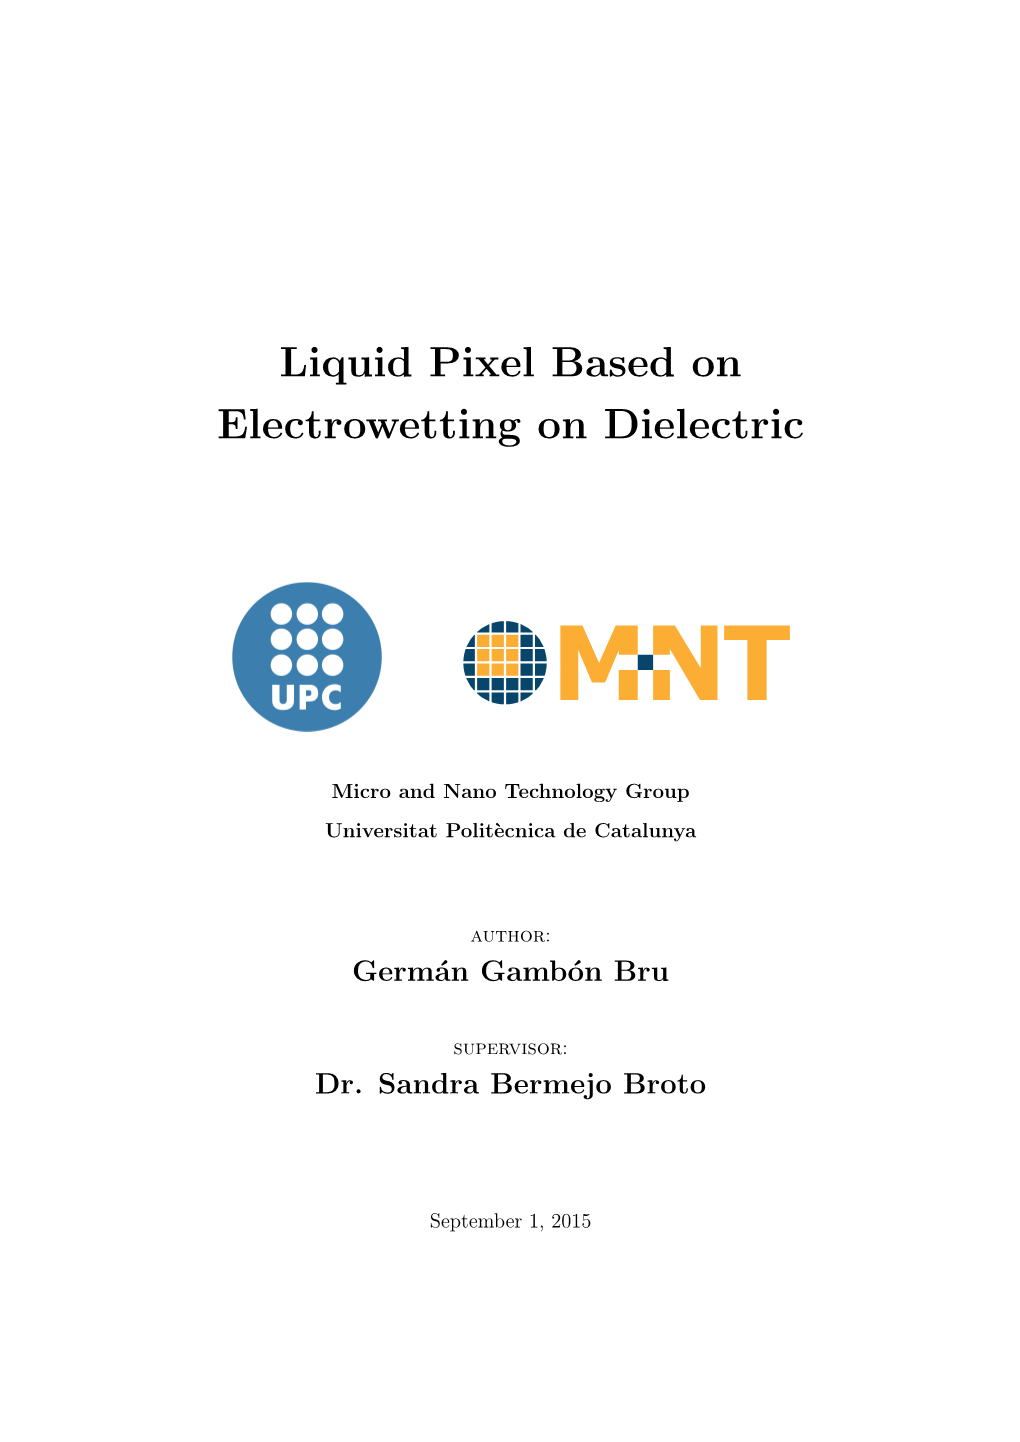 Liquid Pixel Based on Electrowetting on Dielectric